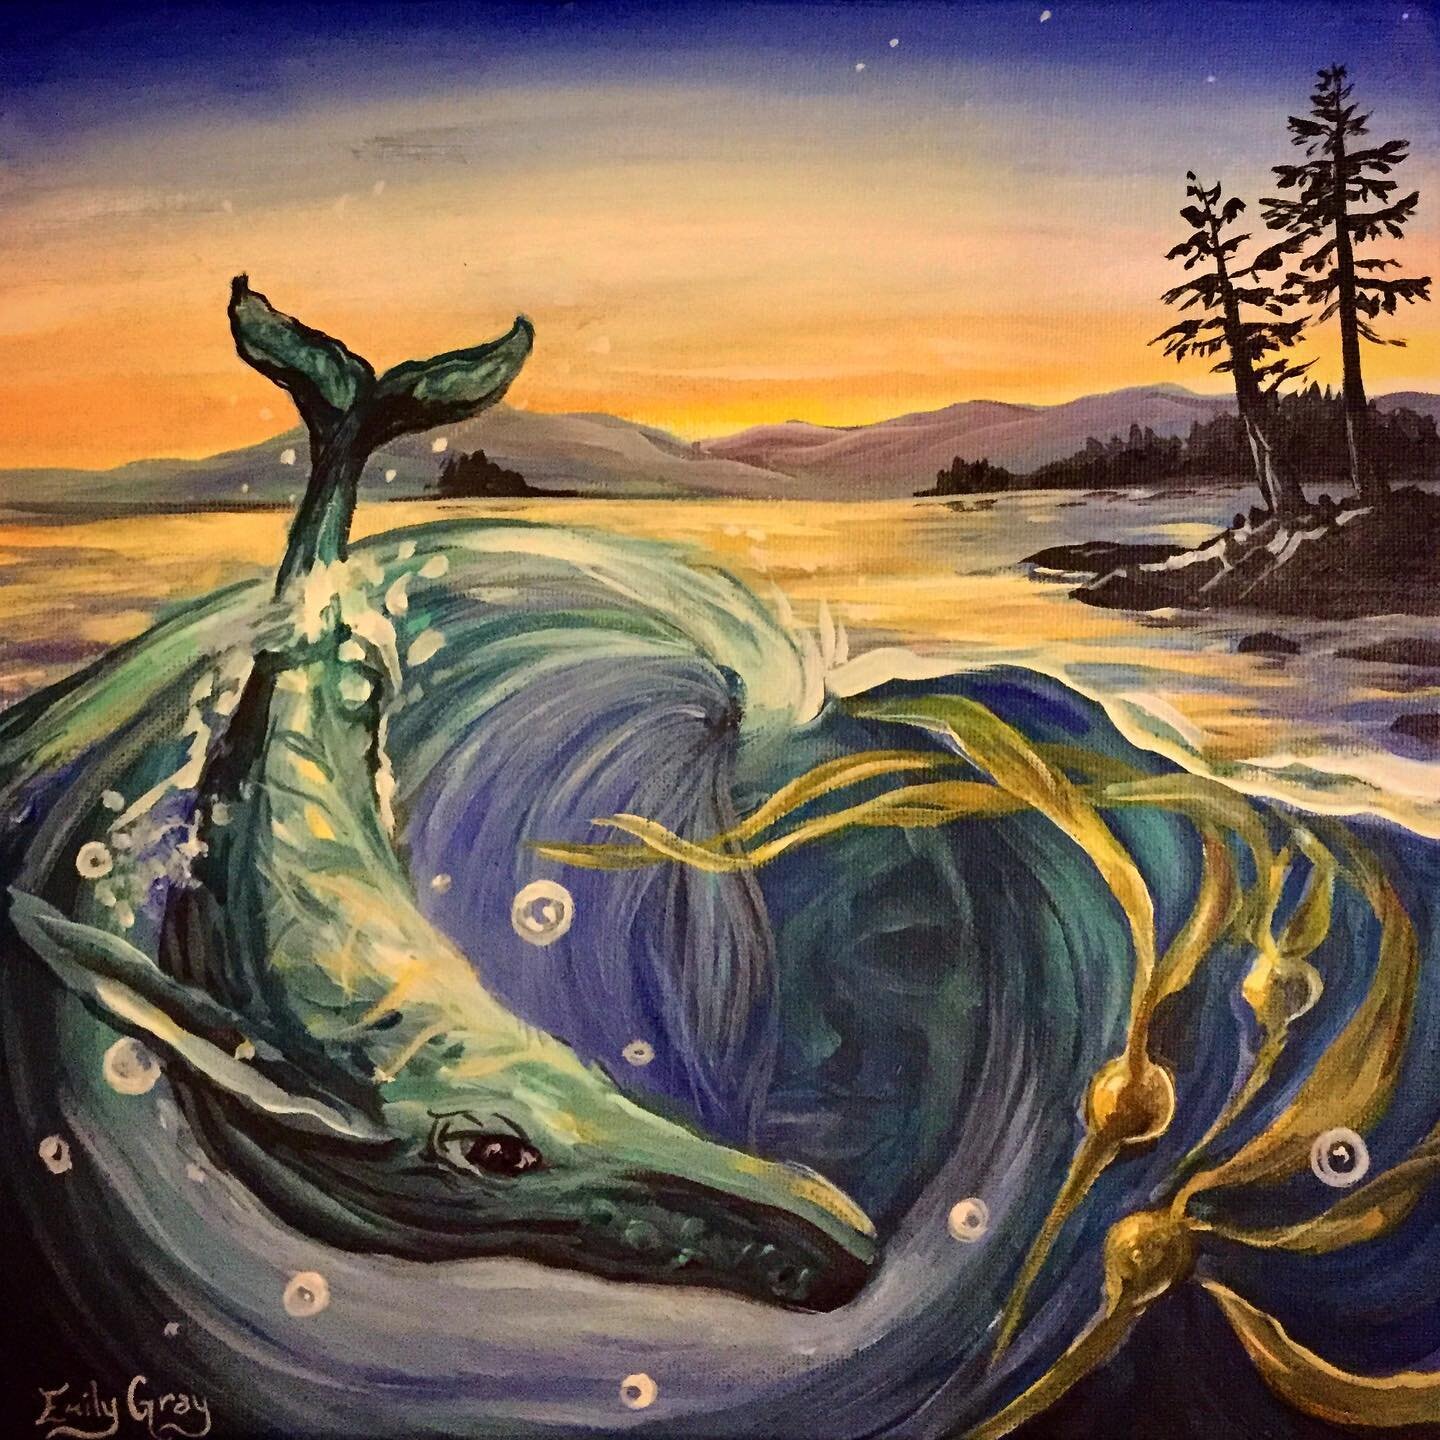 I&rsquo;m excited to be a part of the Vancouver Mural Fest Exhibition with nearly 100 artists who have participated in the festival over the last 4 years! This 12&rsquo;x12&rsquo; piece is available and titled &ldquo;Saltwater&rdquo; wether it&rsquo;